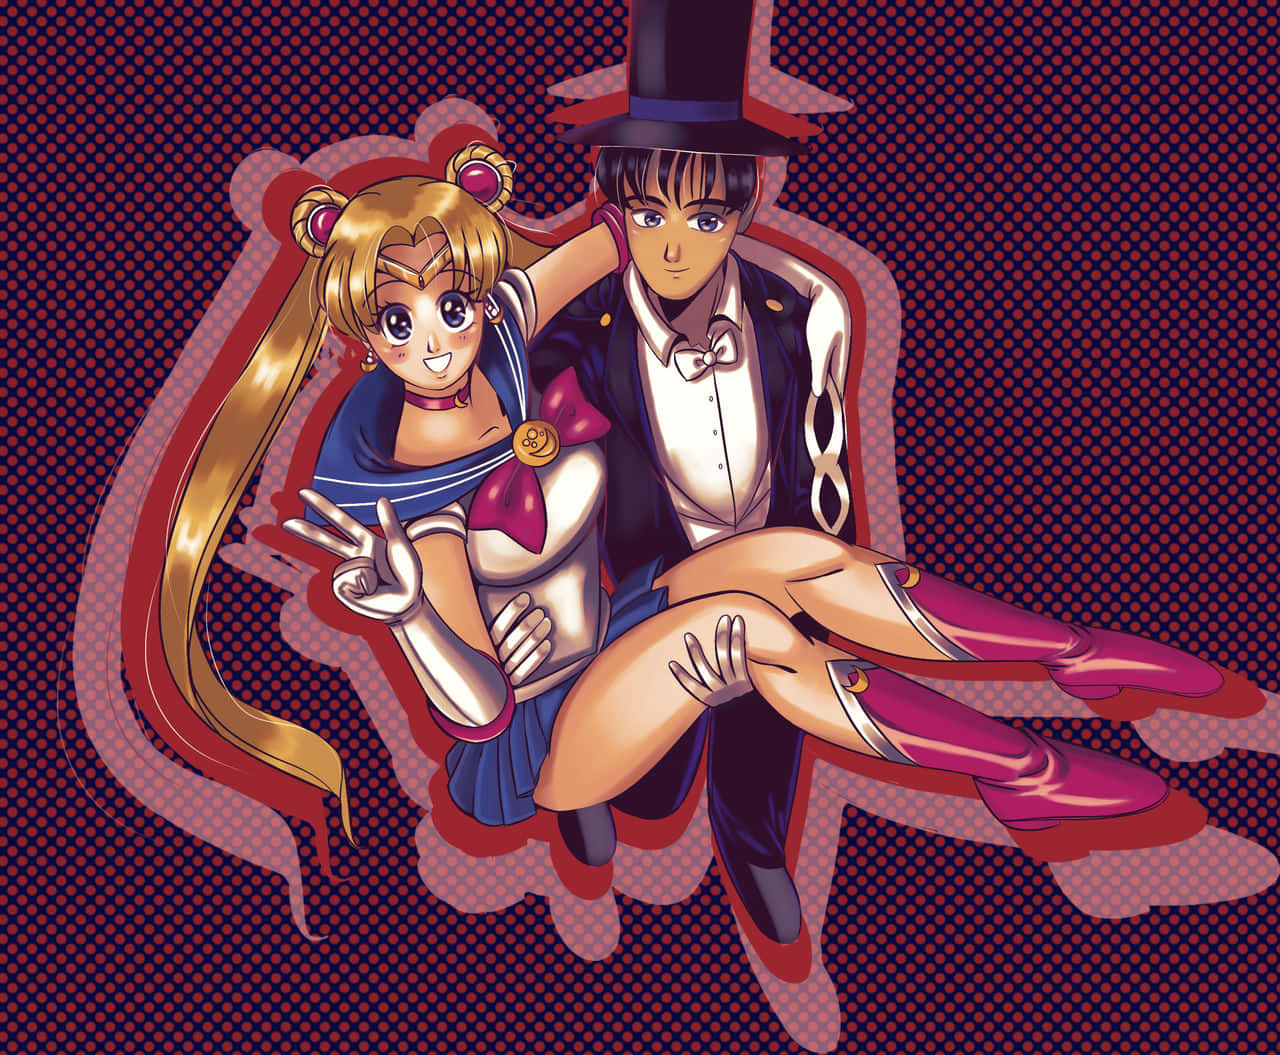 Image Tuxedo Mask From Sailor Moon Looks Cool While Fighting The Forces Of Evil Wallpaper